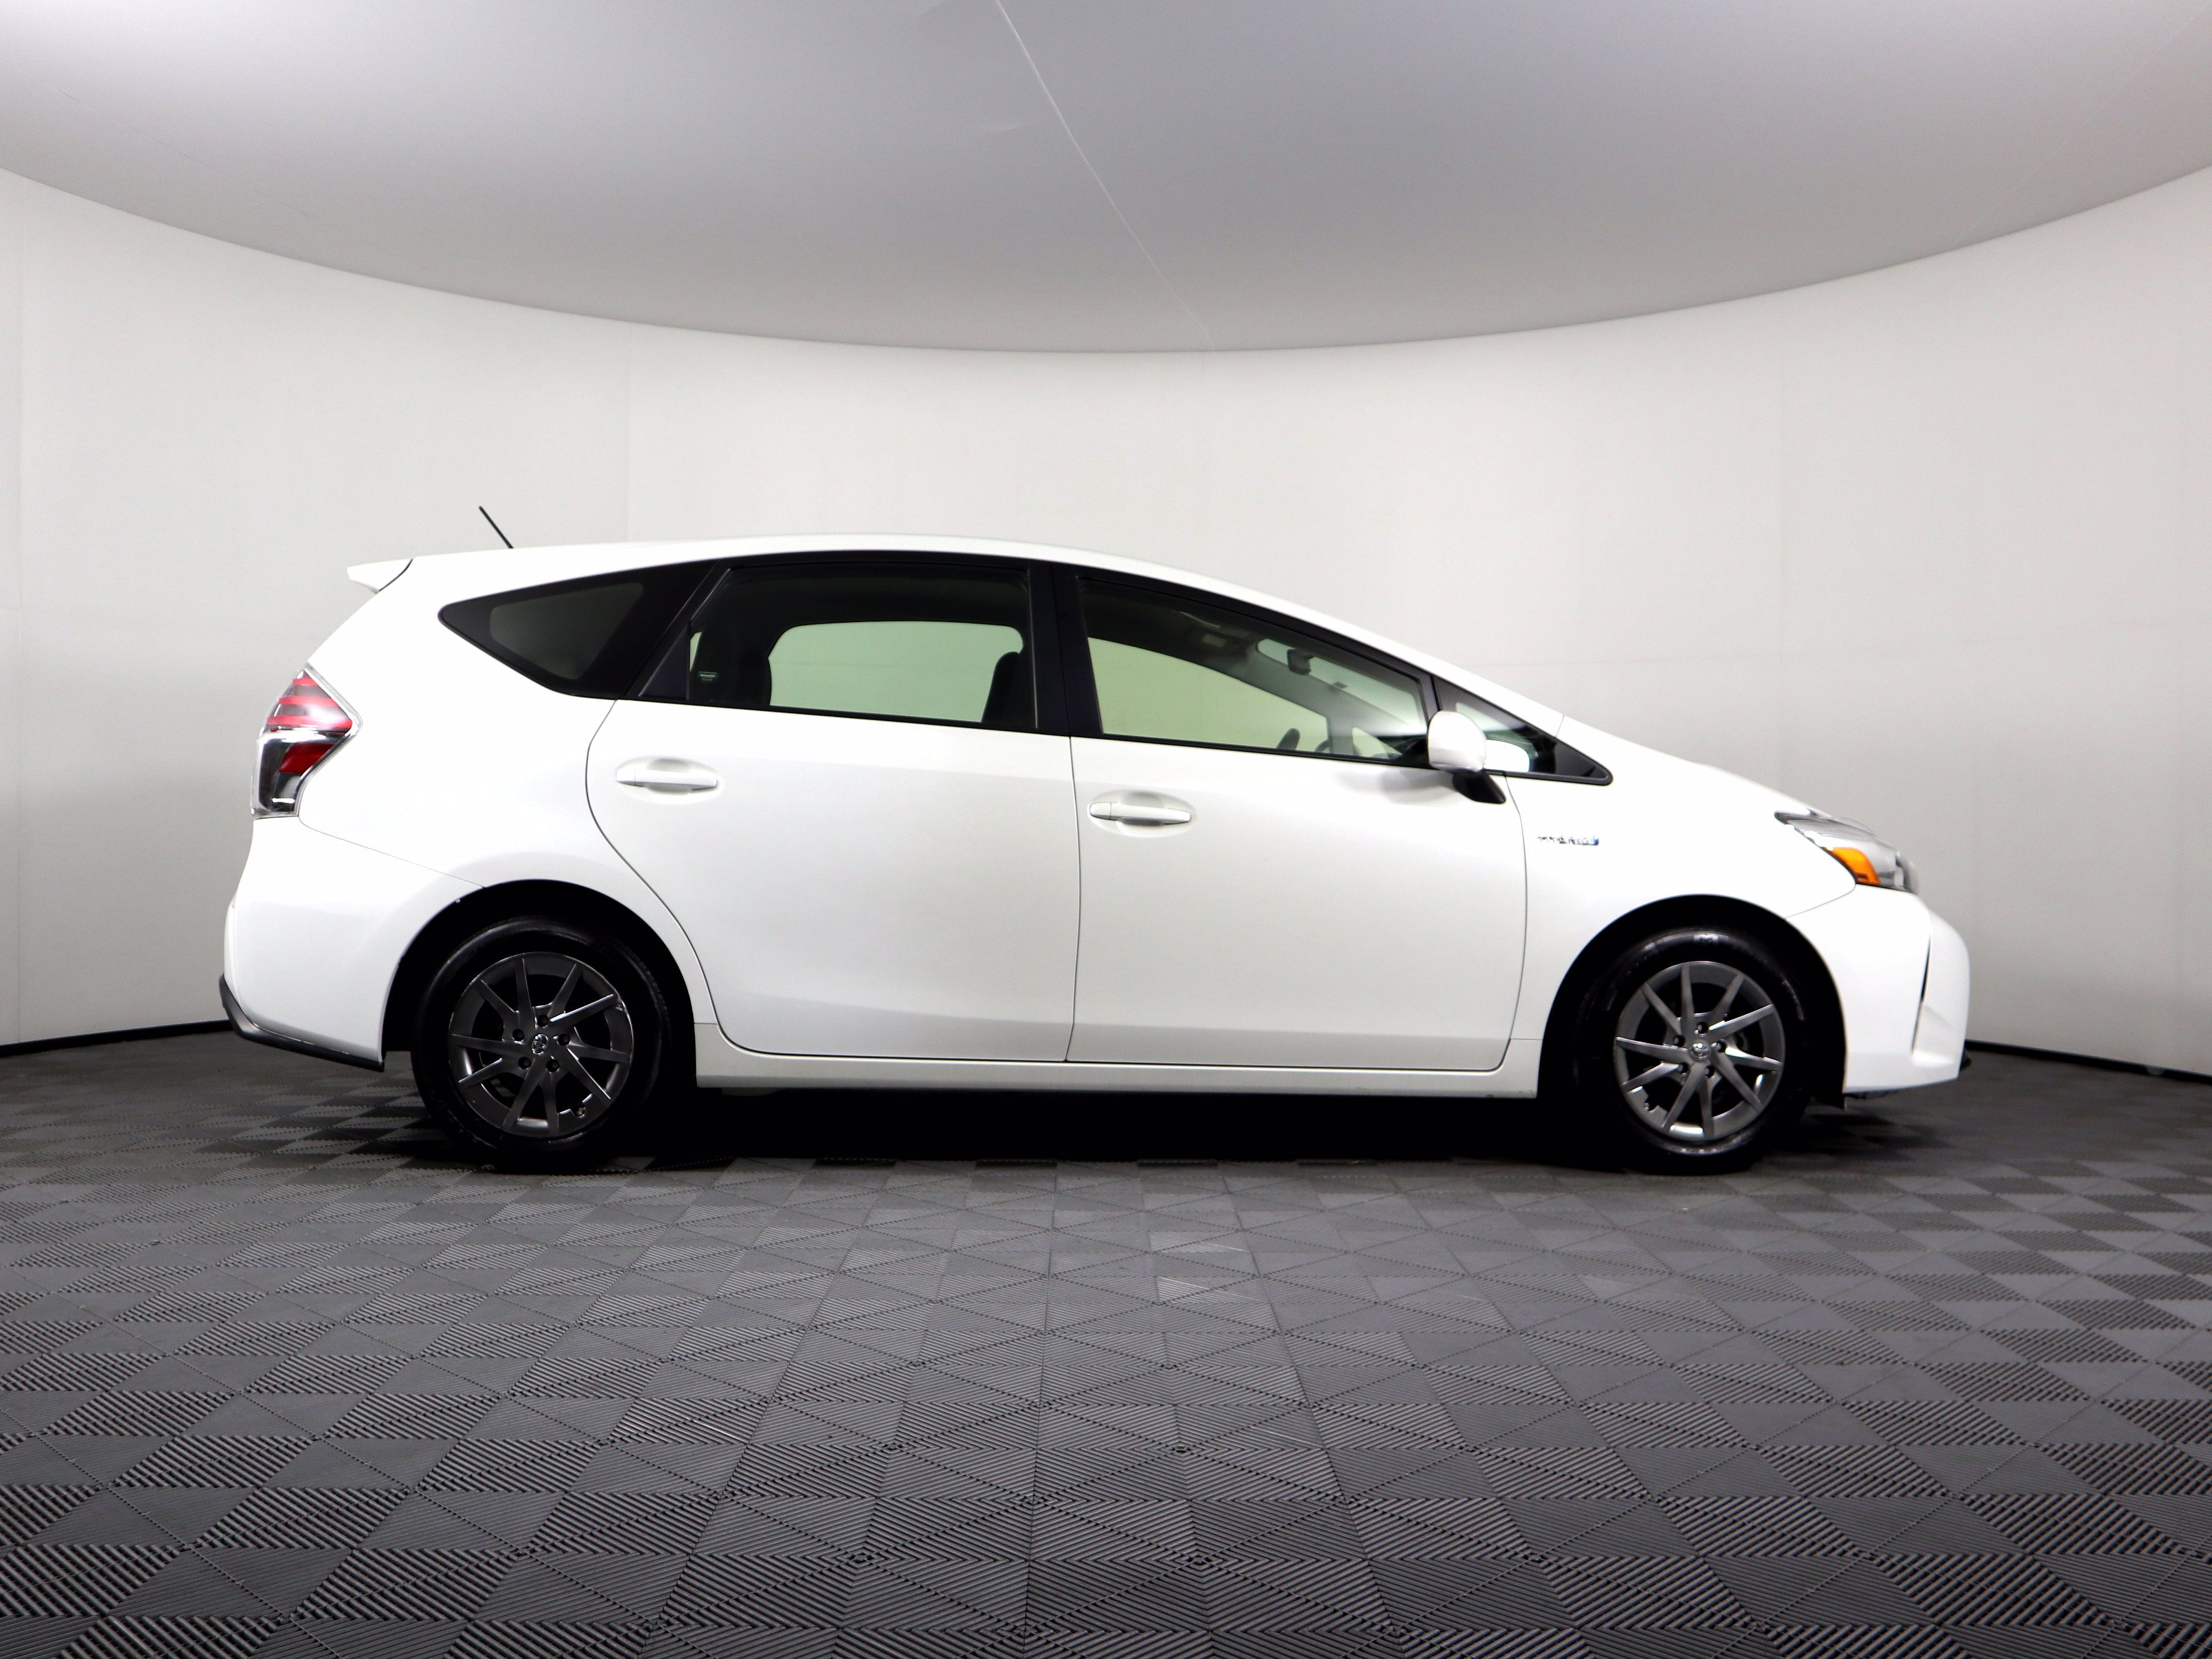 PreOwned 2017 Toyota Prius v Five Station Wagon in